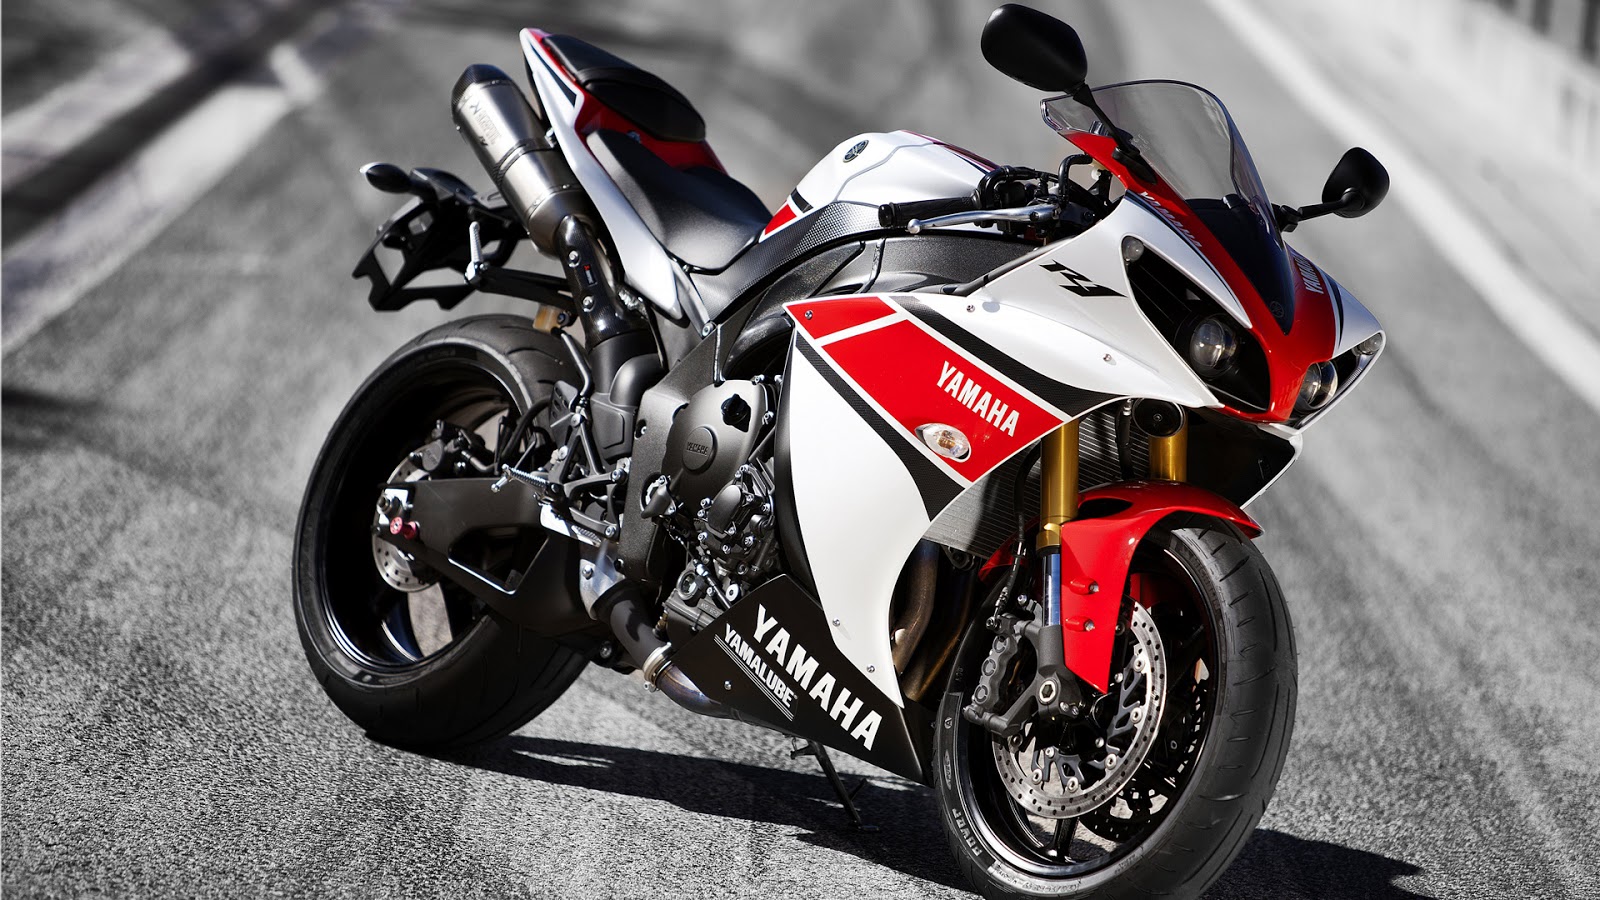  Yamaha  R1 HD  Wallpapers  High Definition  Free Background